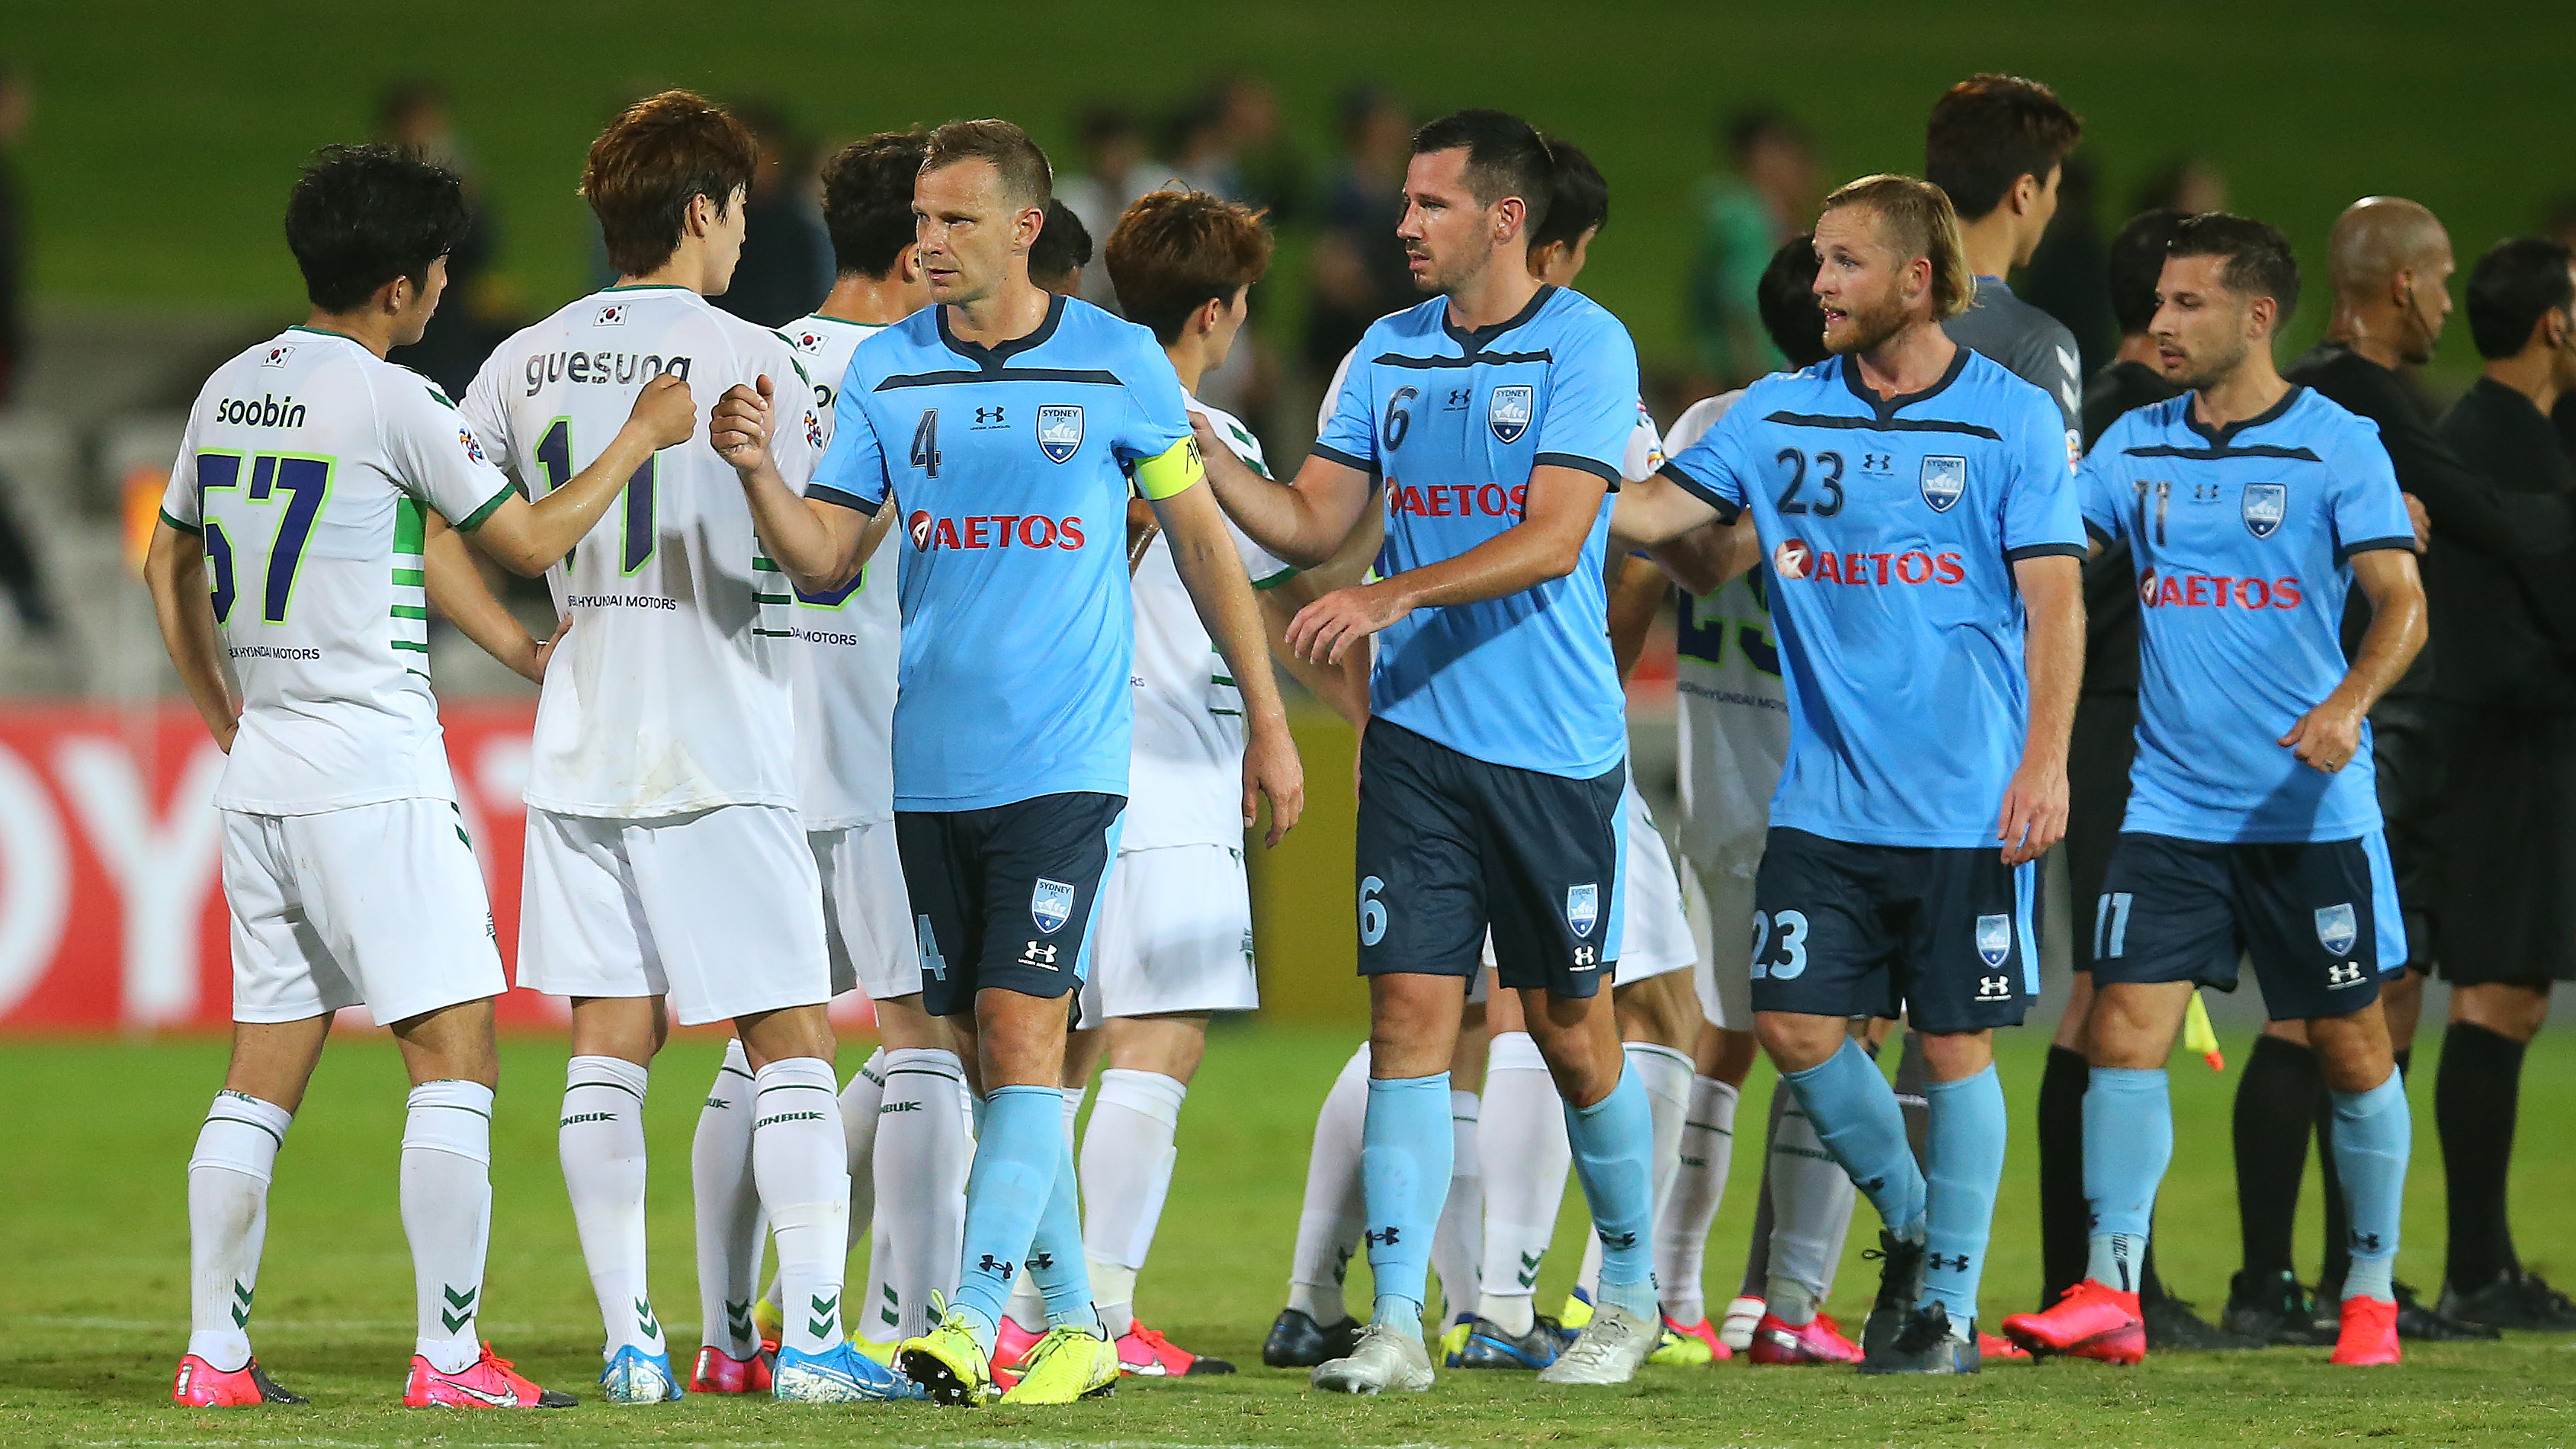 A-League and Australian football news LIVE: Sydney FC held to ACL draw